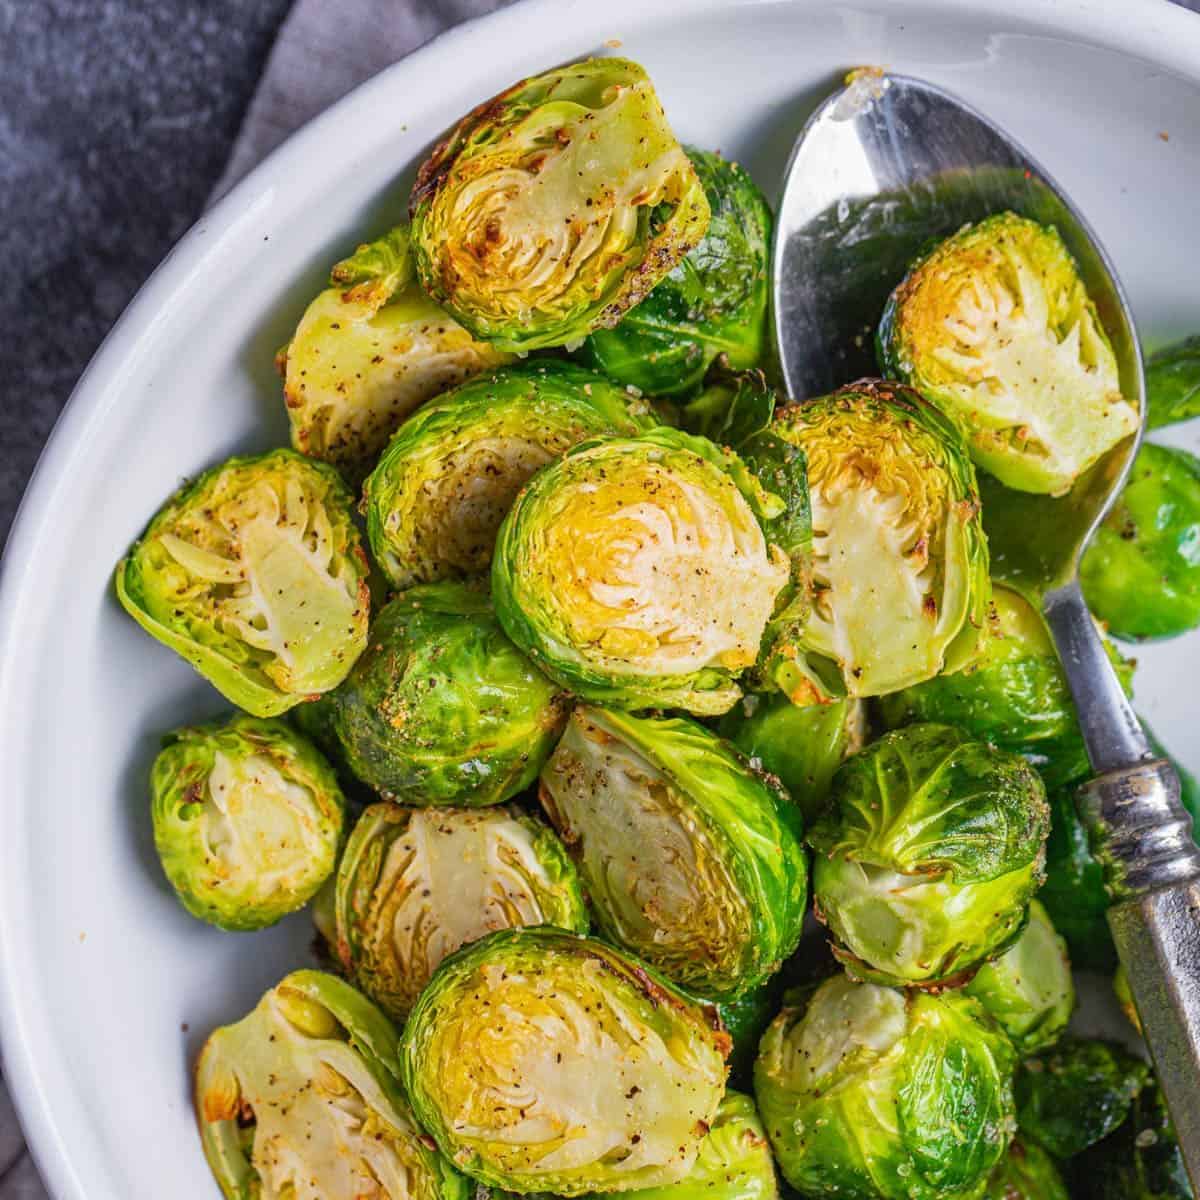 natasha's air fryer brussel sprouts